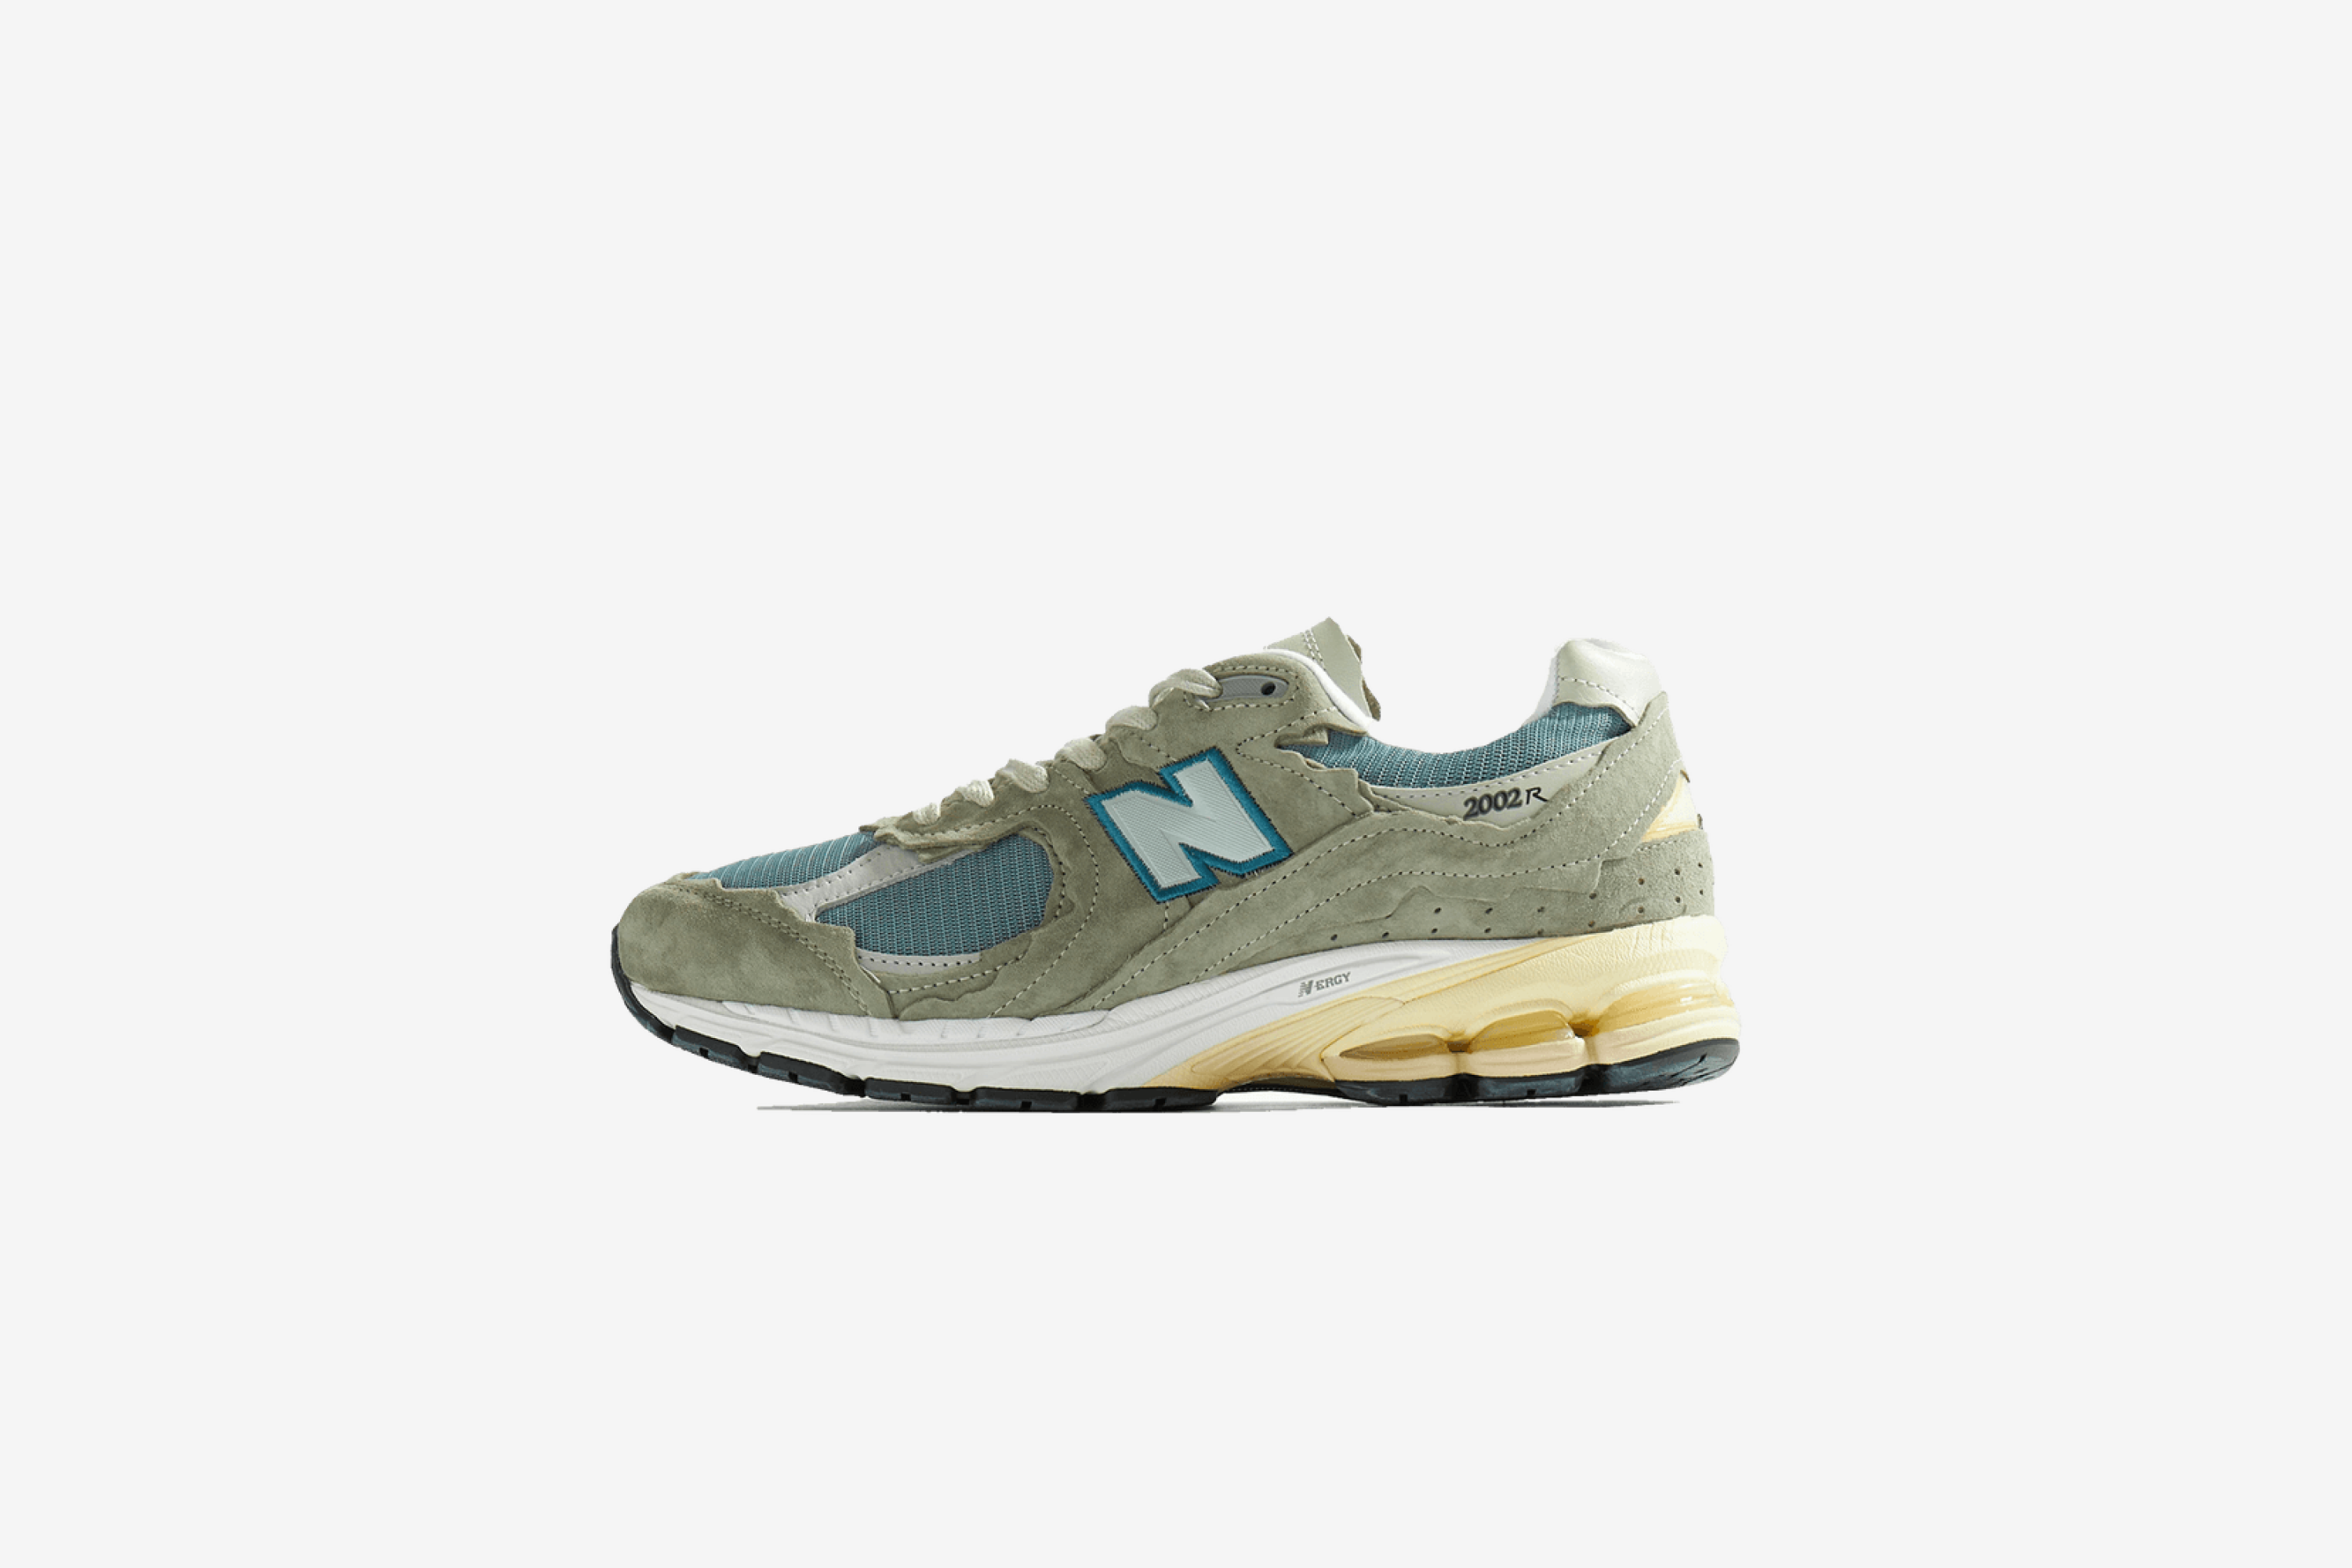 New Balance 2002R Protection Pack 'Mirage Grey'